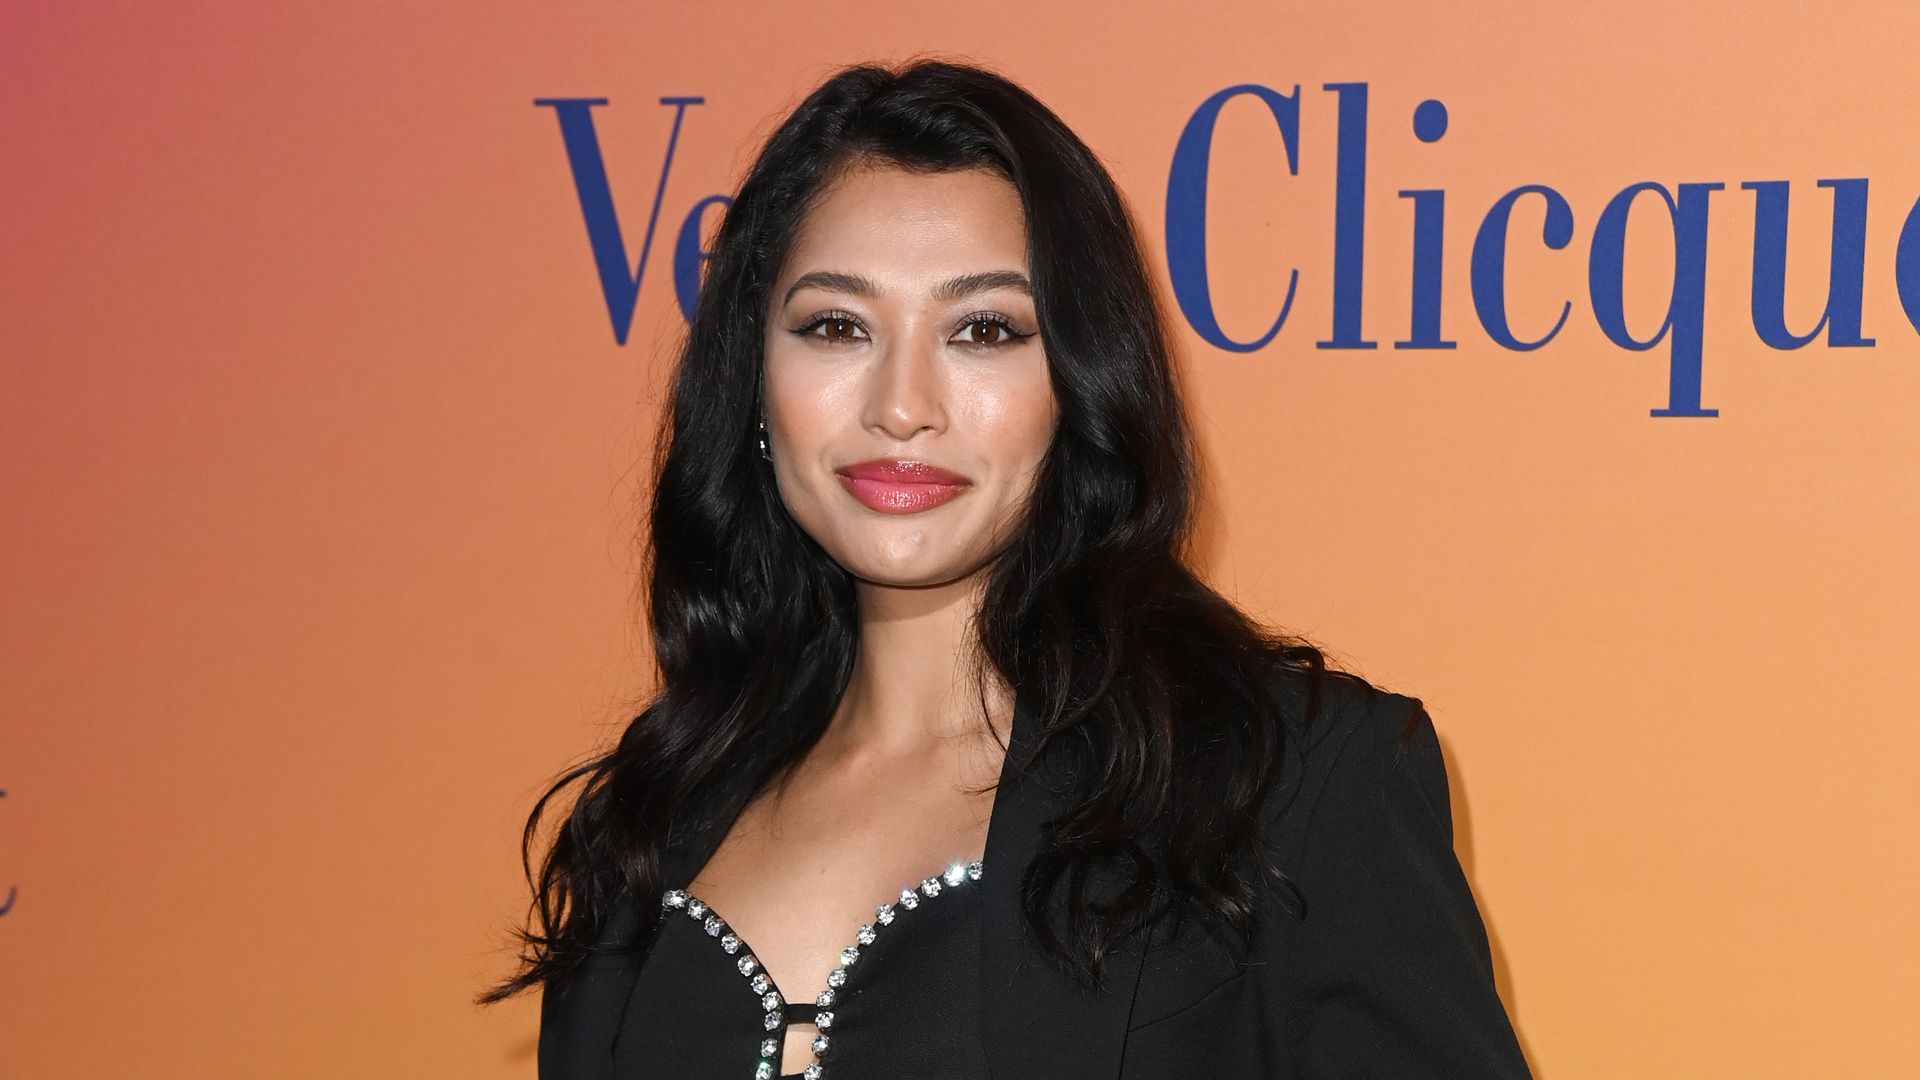 Vanessa White in a black outfit at a red carpet event